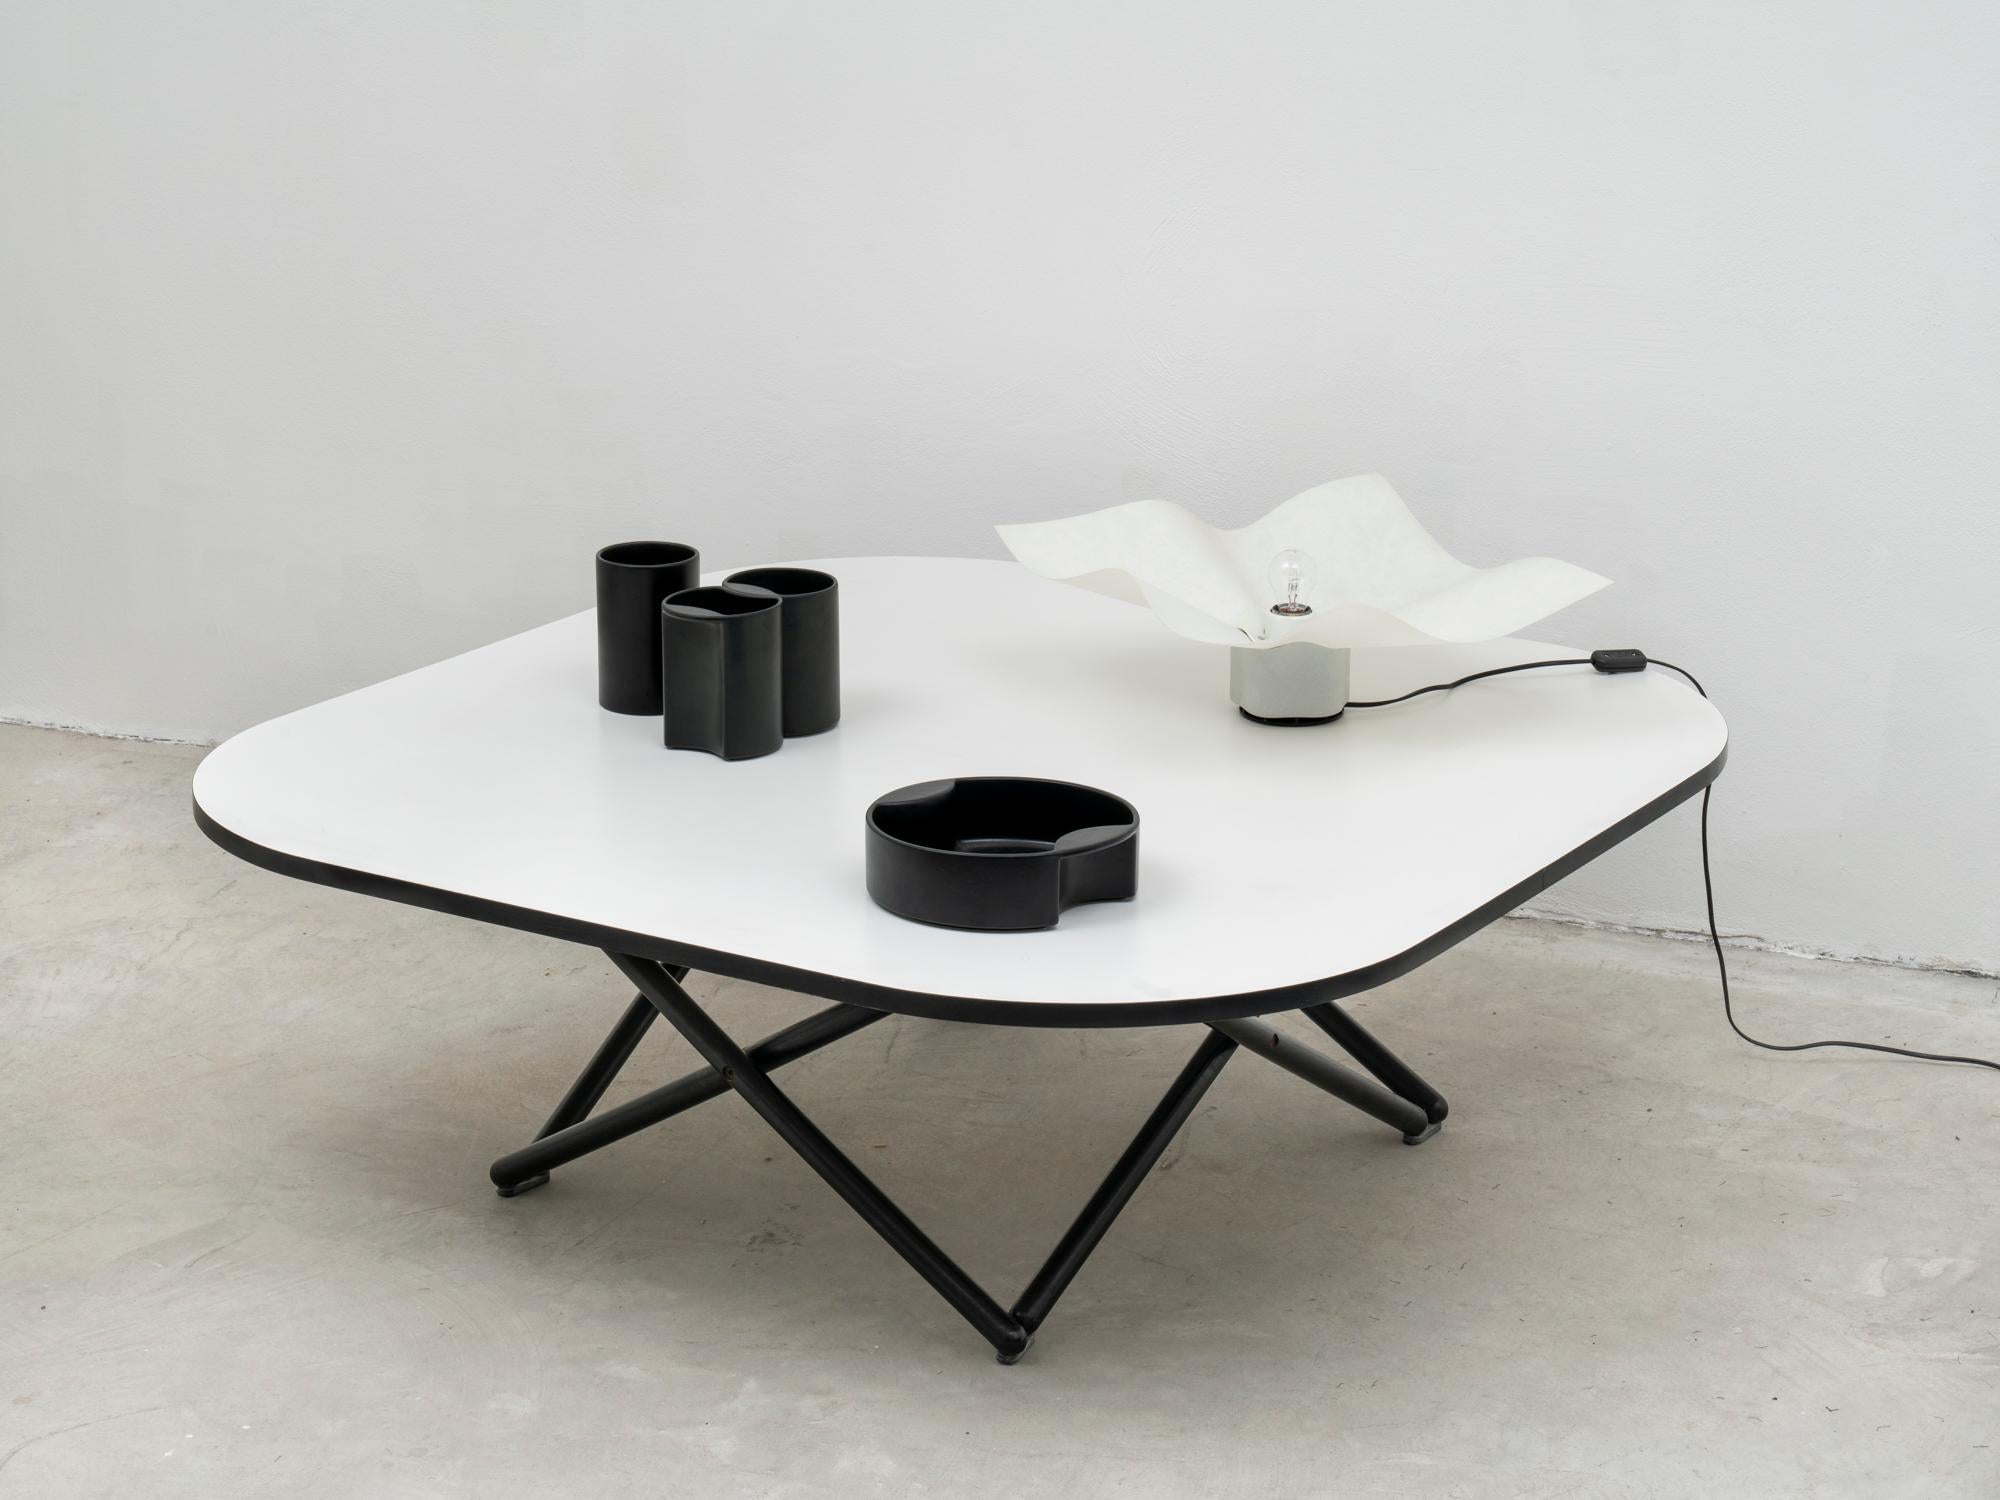 Late 20th Century Post-Modern “Broomstick” Coffee Table by Vico Magistretti for Alias, 1980s For Sale